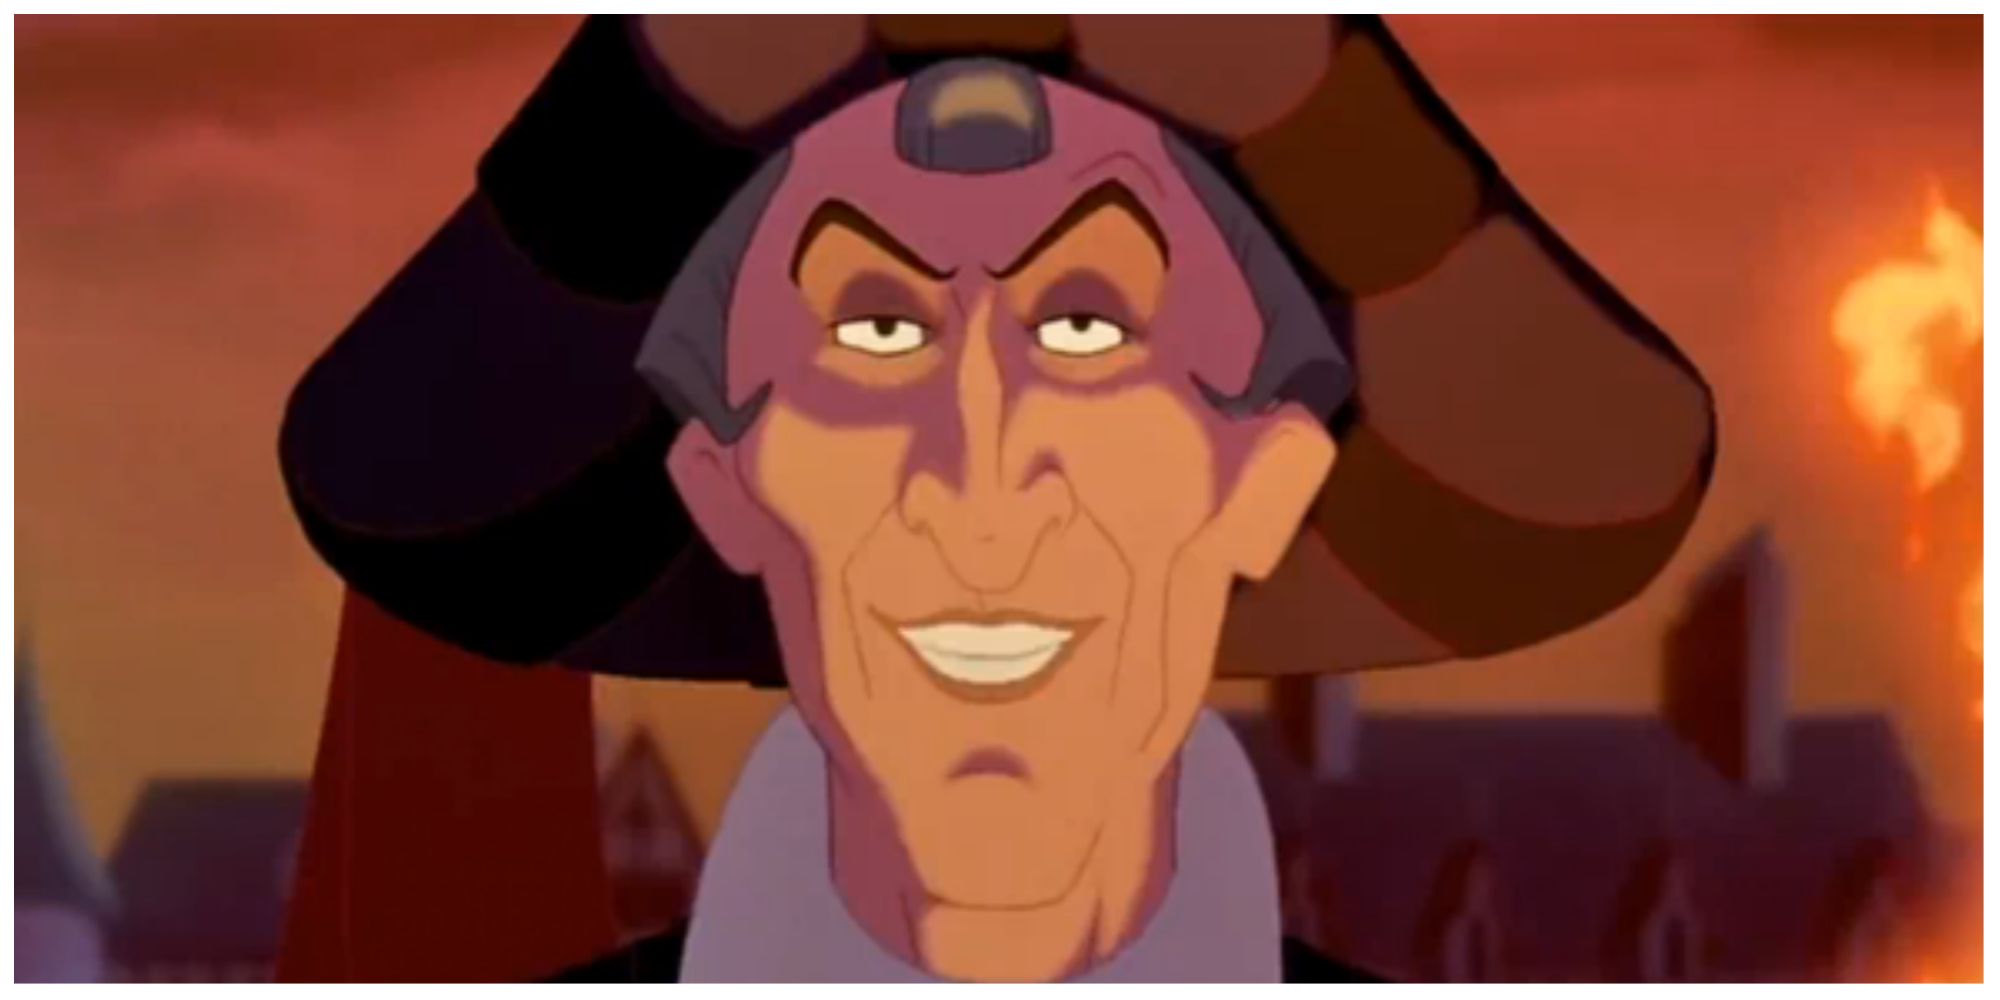 Judge Claude Frollo smiling in the Hunchback of Notre Dame